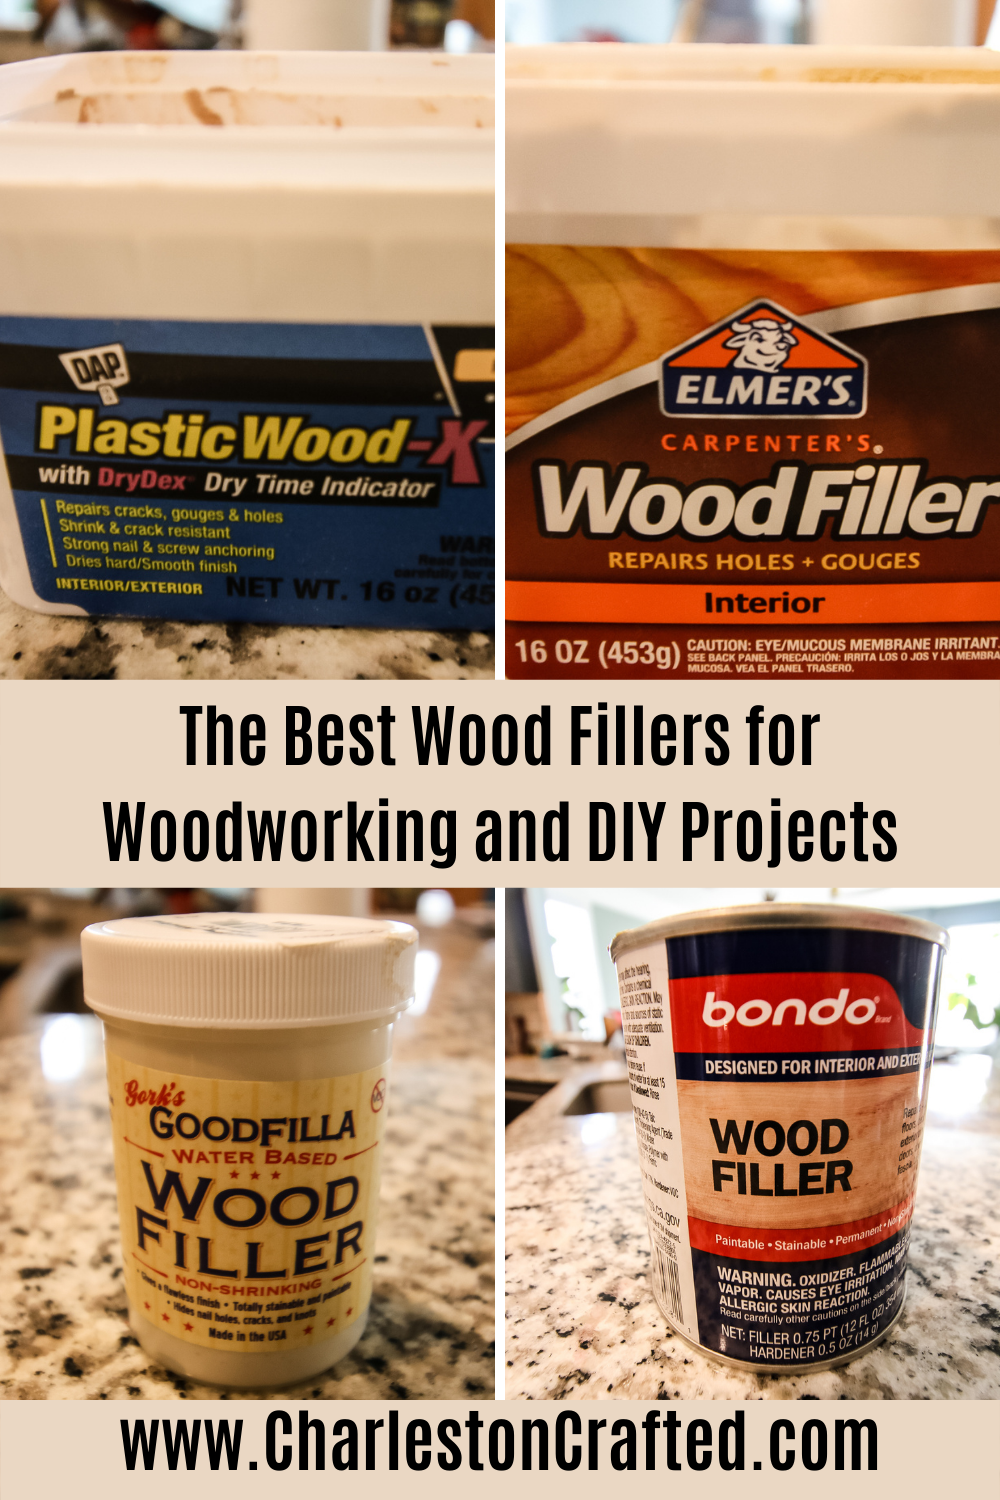 7 Things to Consider Before Choosing a Wood Filler